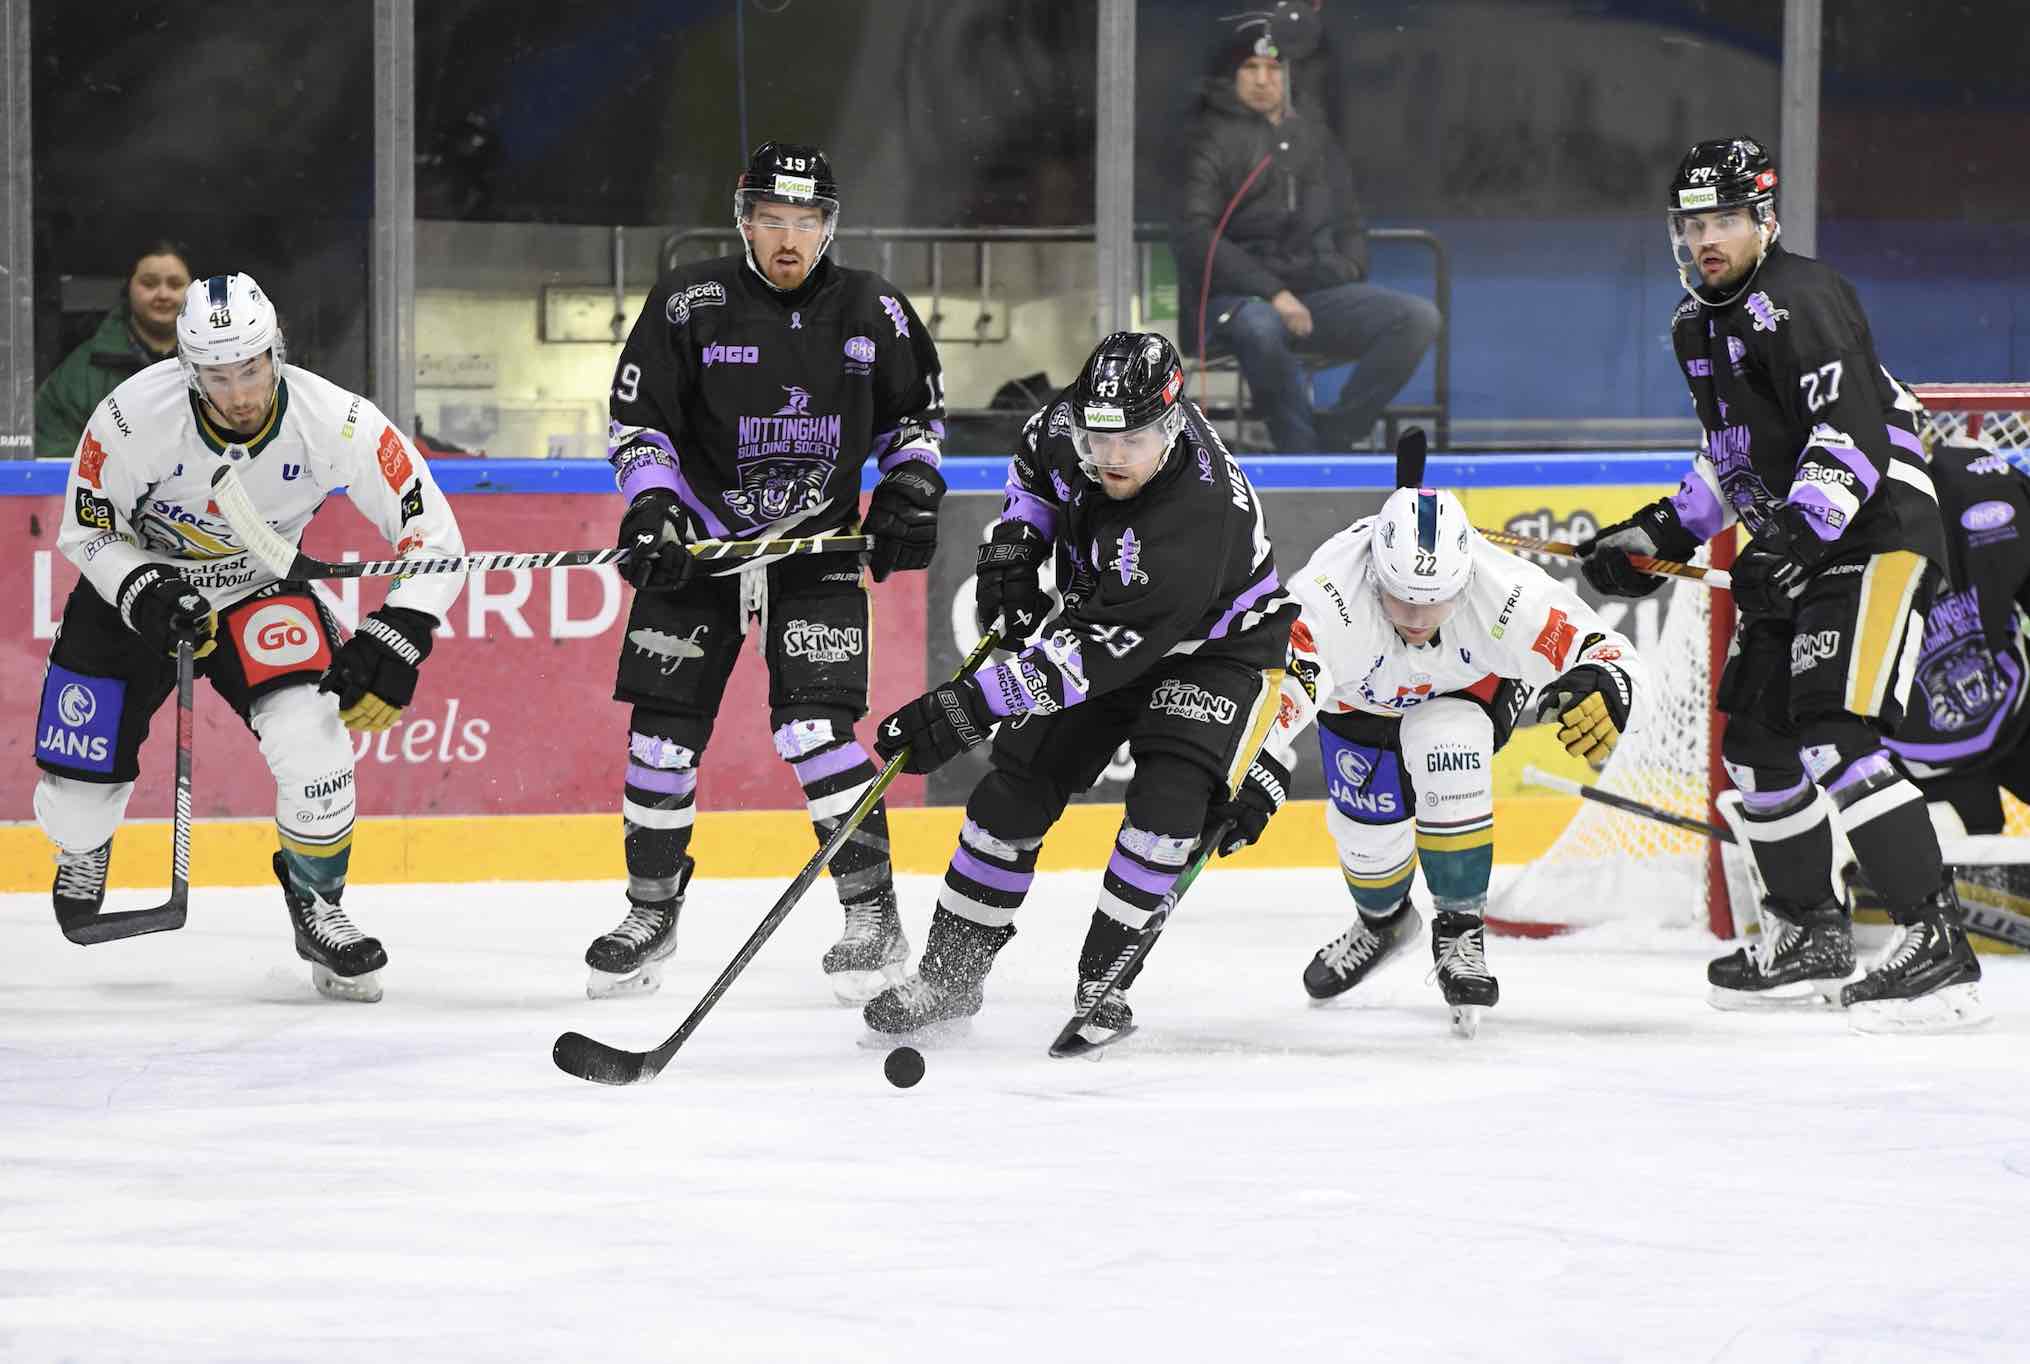 PANTHERS TRAVEL TO BELFAST TODAY Top Image